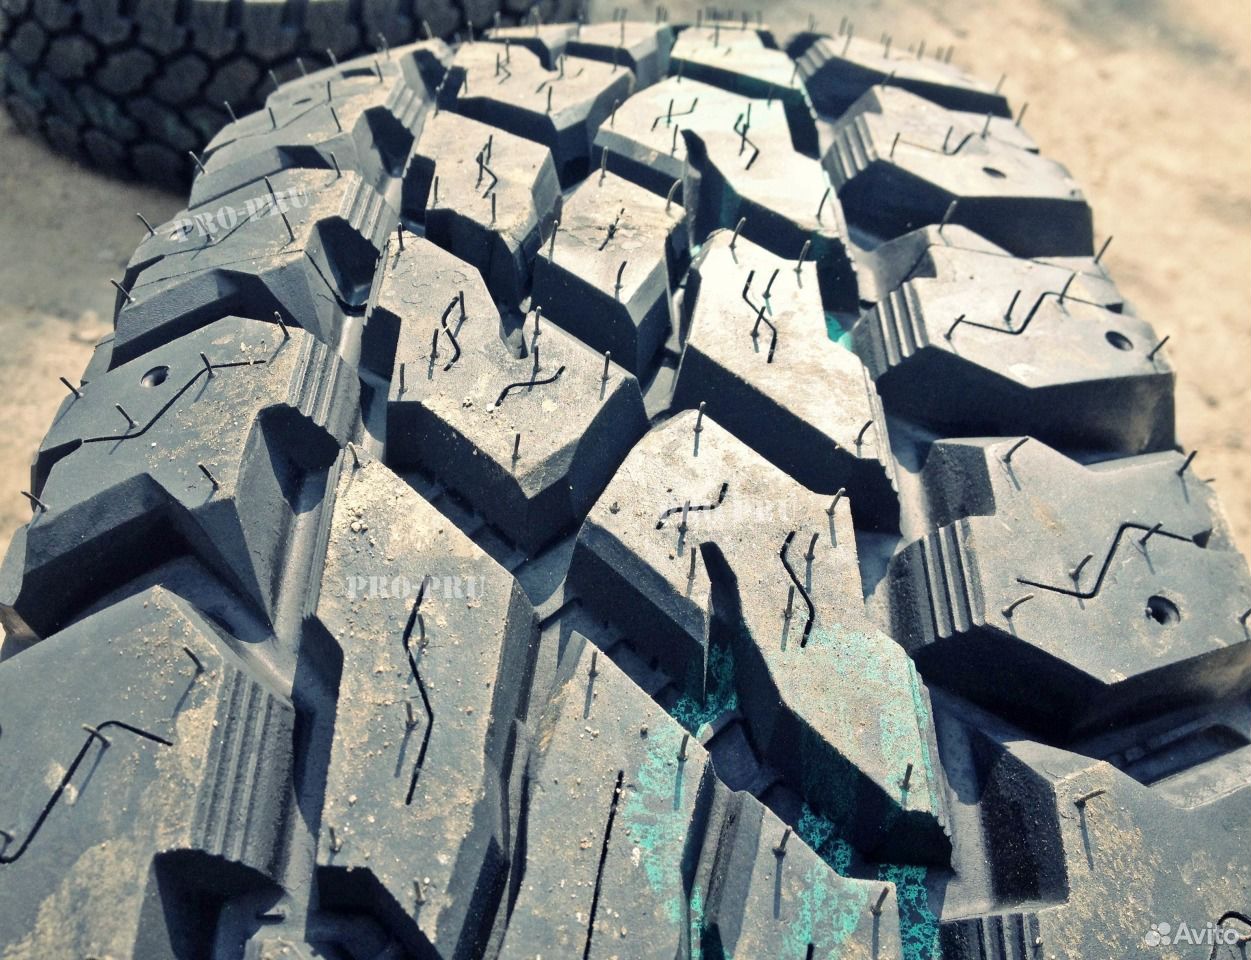 Cooper Discoverer s/t Maxx 235/85 r16. Cooper St Maxx 265/70 r17. 265/70 R16 Cooper Discoverer. Резина грязевая Купер r15 Дискавери s t.